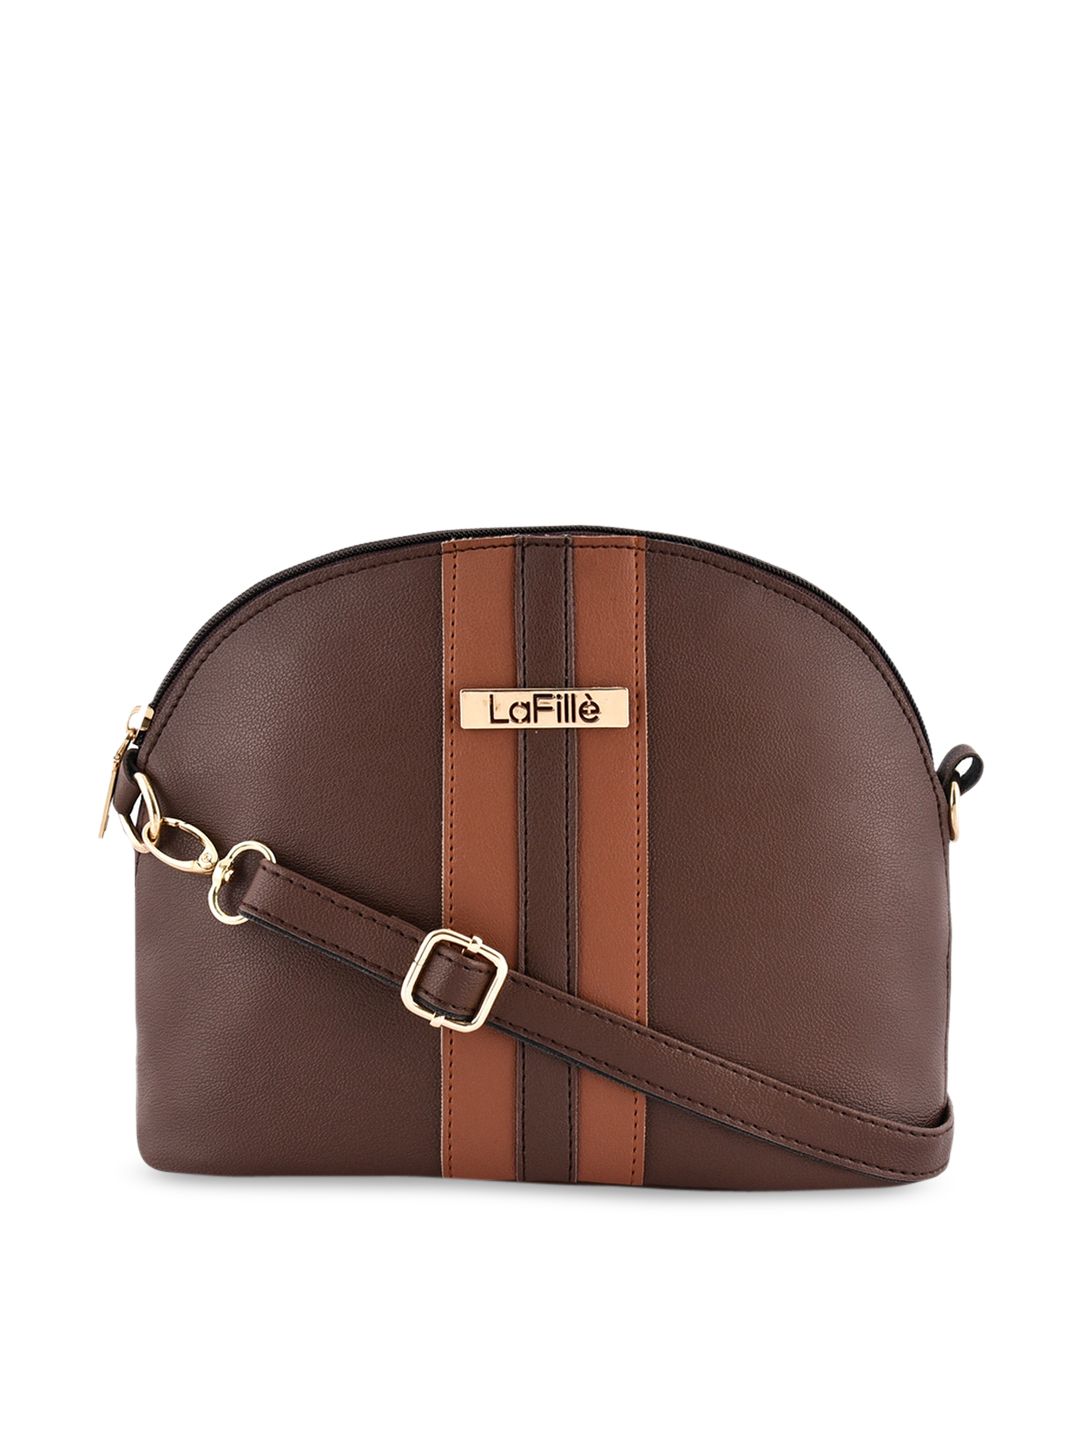 LaFille Brown Striped PU Structured Sling Bag with Bow Detail Price in India